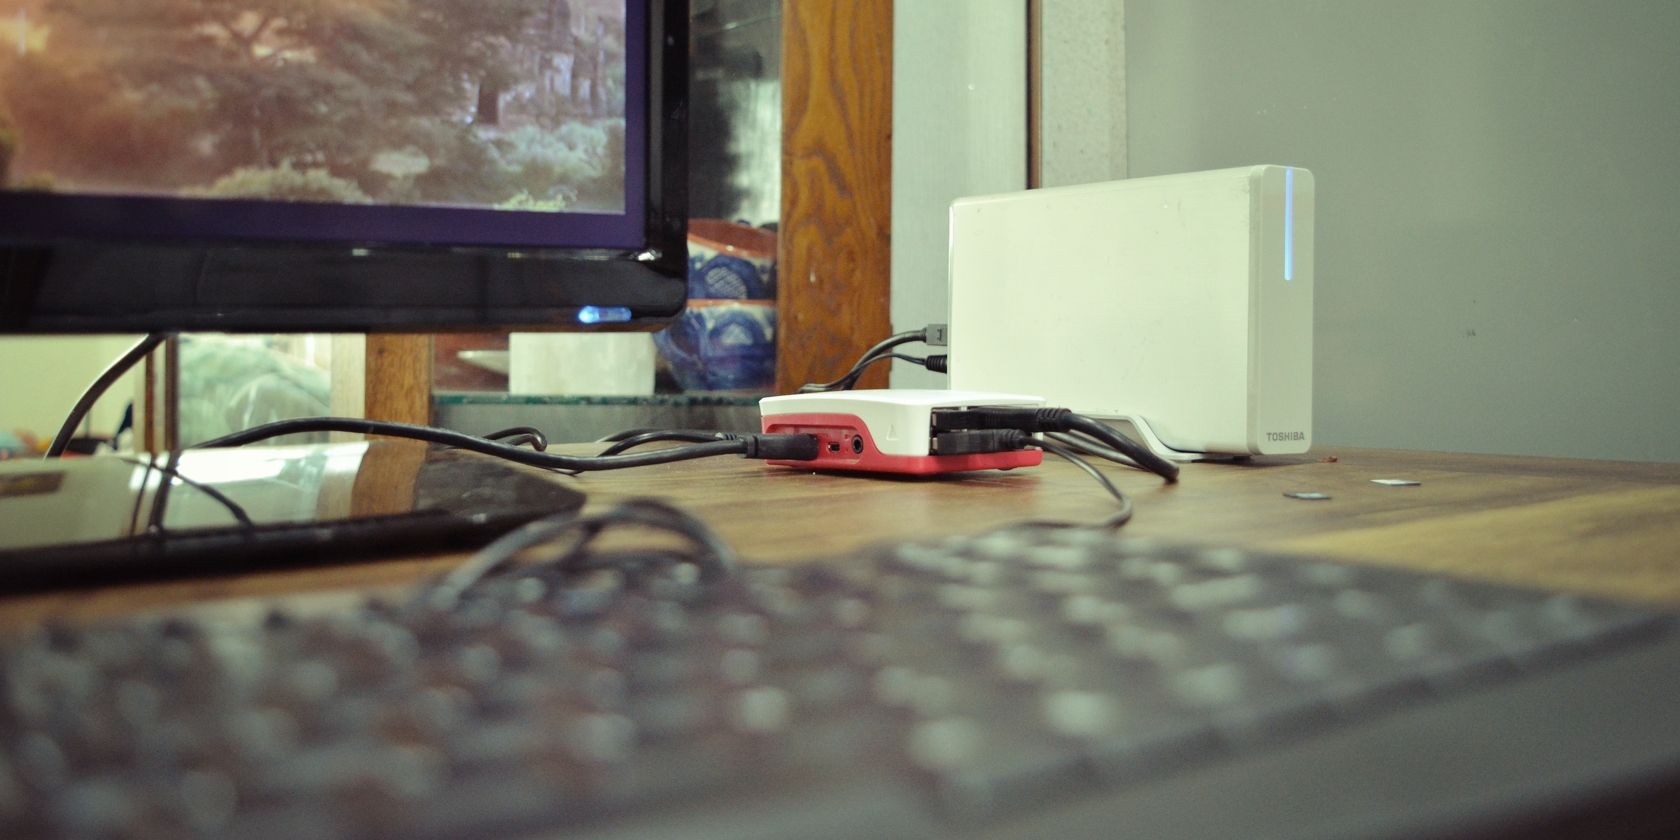 Install Just 7 Apps to Use Your Raspberry Pi Like a Work PC